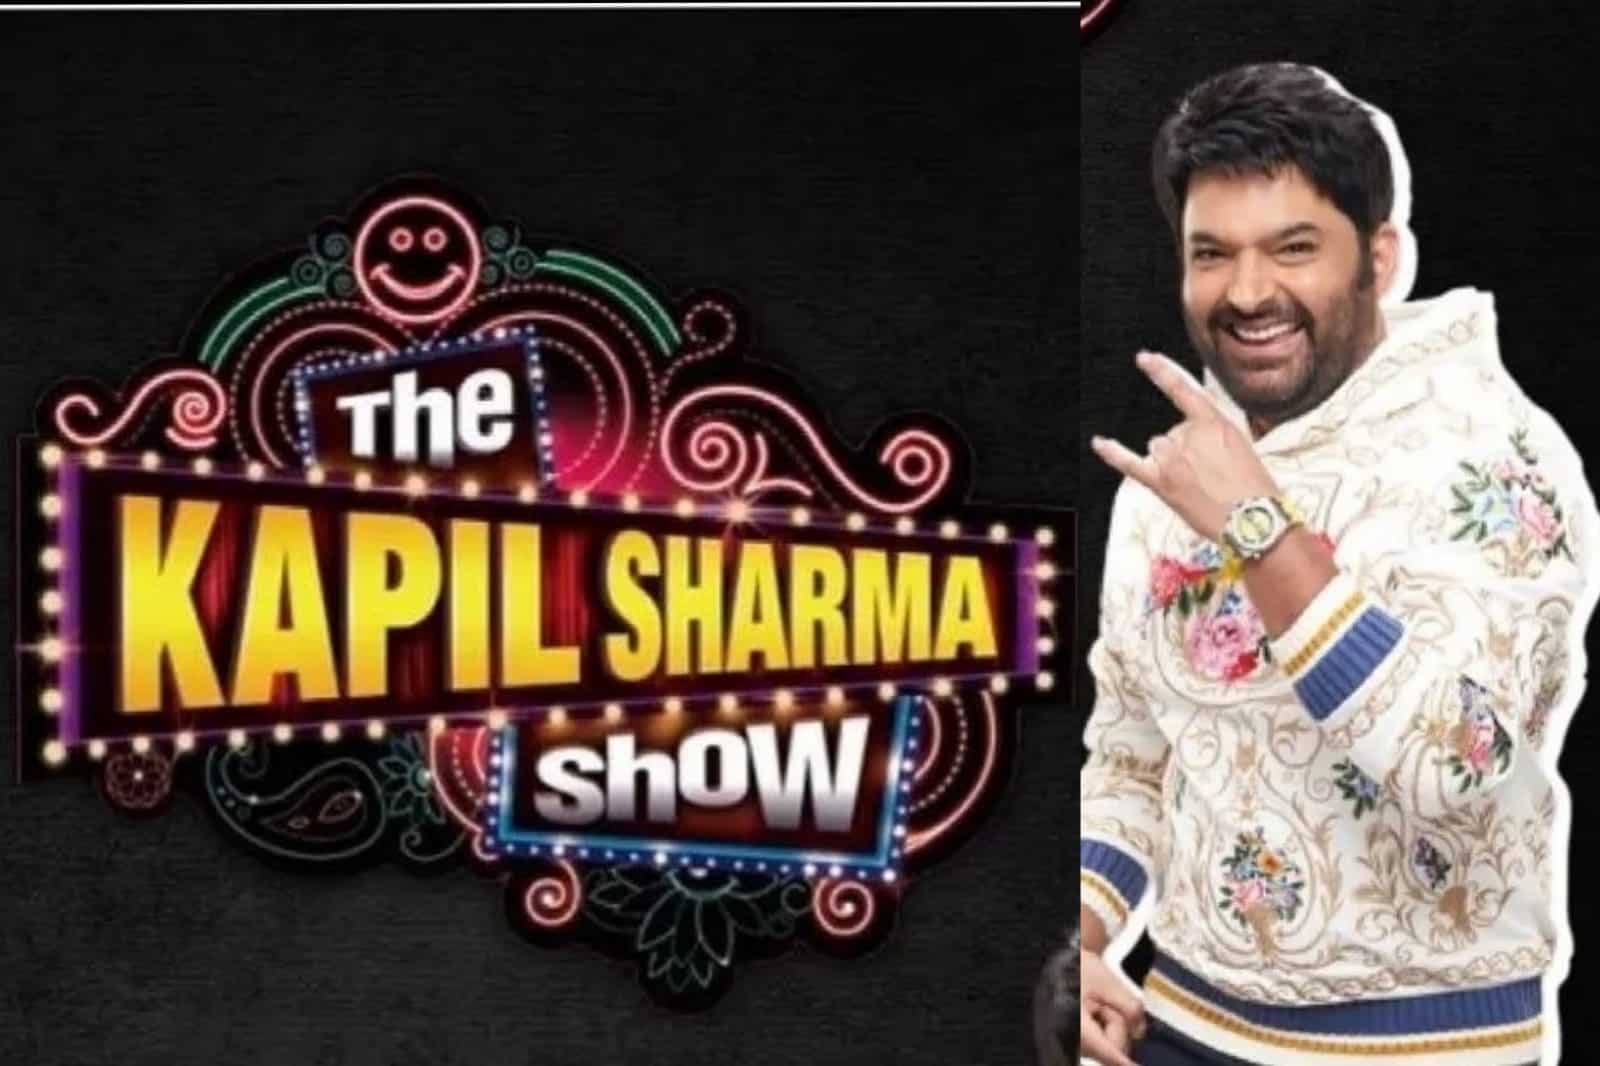 The Kapil Sharma Show: Exclusive! Suniel Shetty to grace the show to  promote his upcoming project “